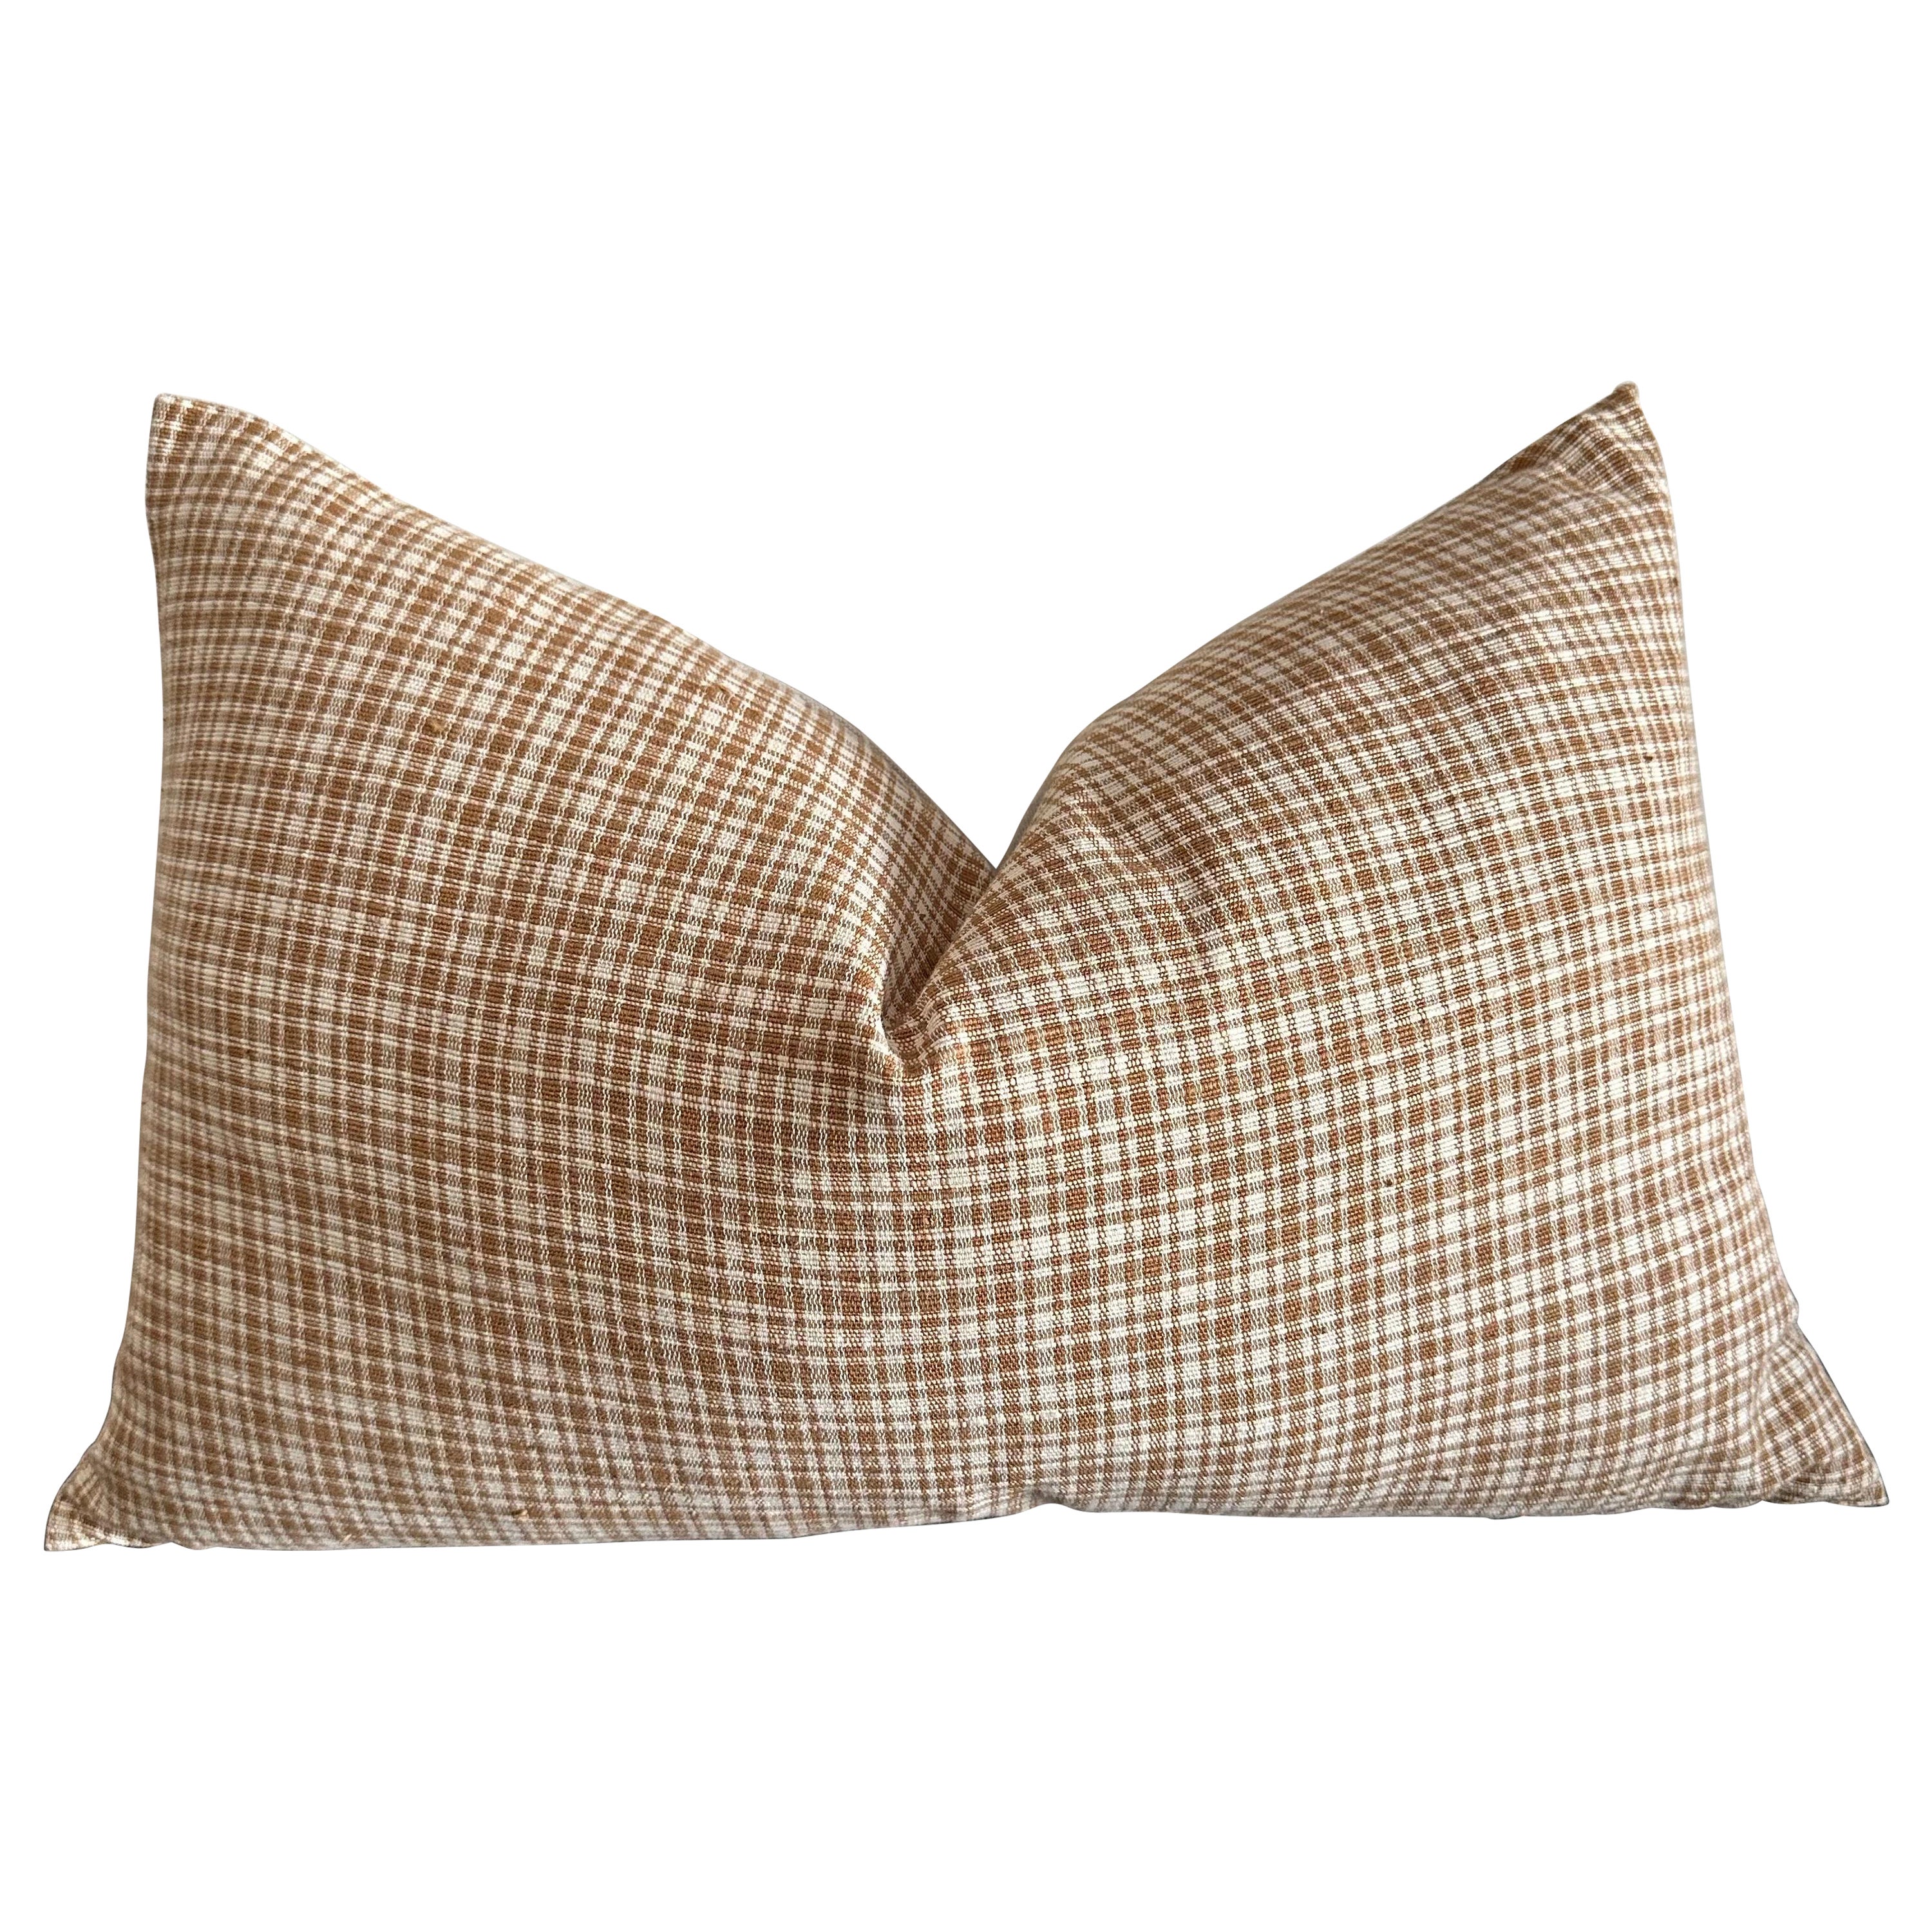 Tiburon Woven Brown Plaid Lumbar Pillow With Down Feather Insert For Sale